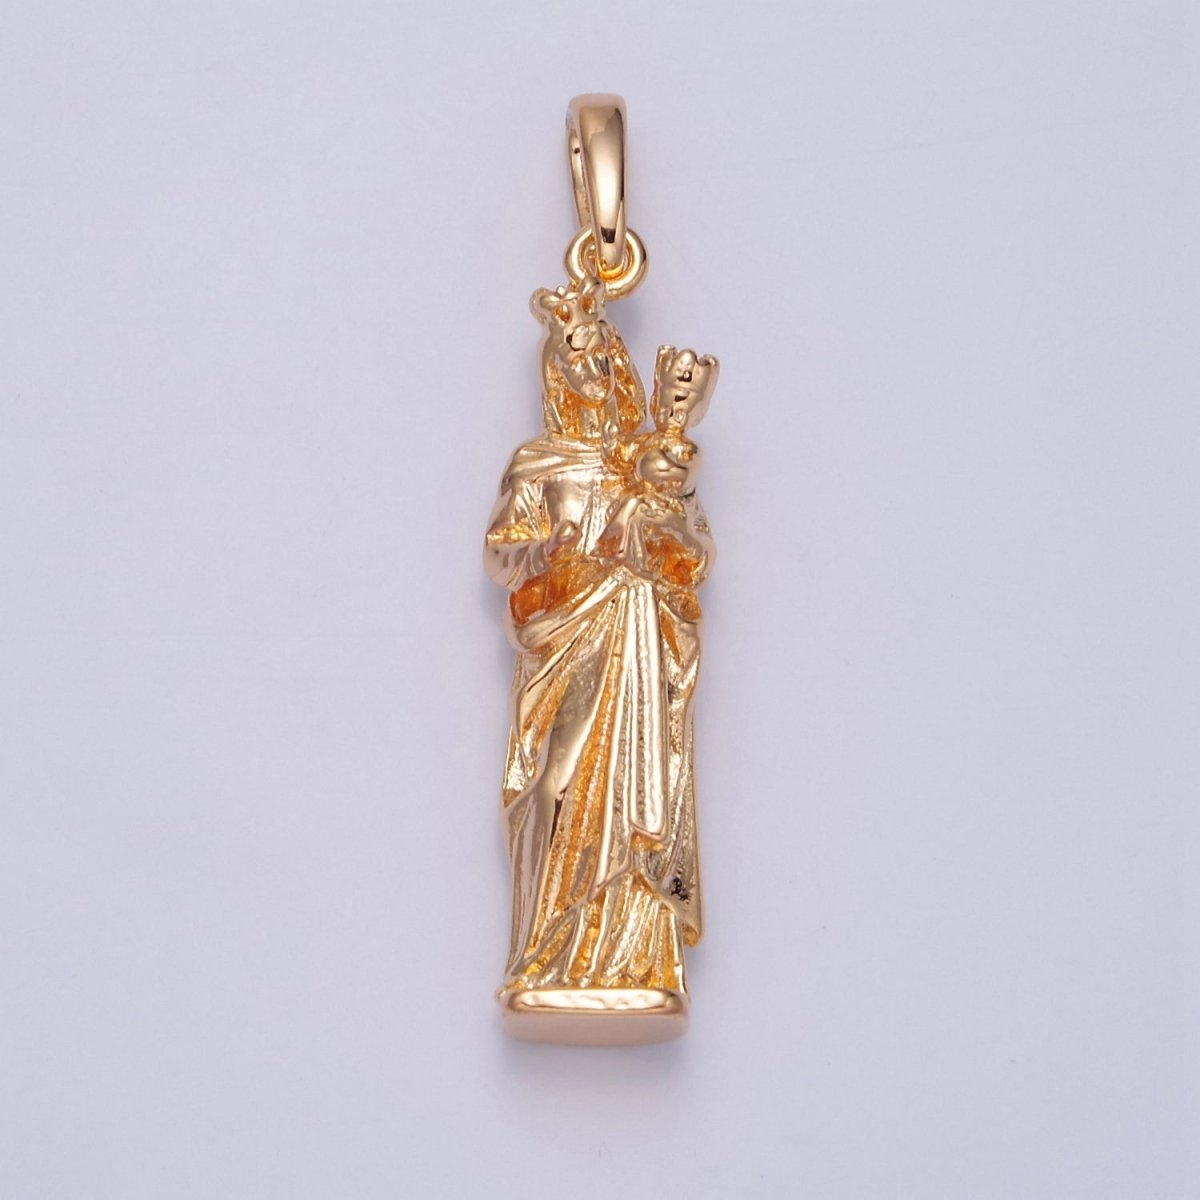 16K Gold Filled Mother Mary with Baby Jesus Charm, Religious Catholic Pendant For DIY Jewelry Making I-070 - DLUXCA